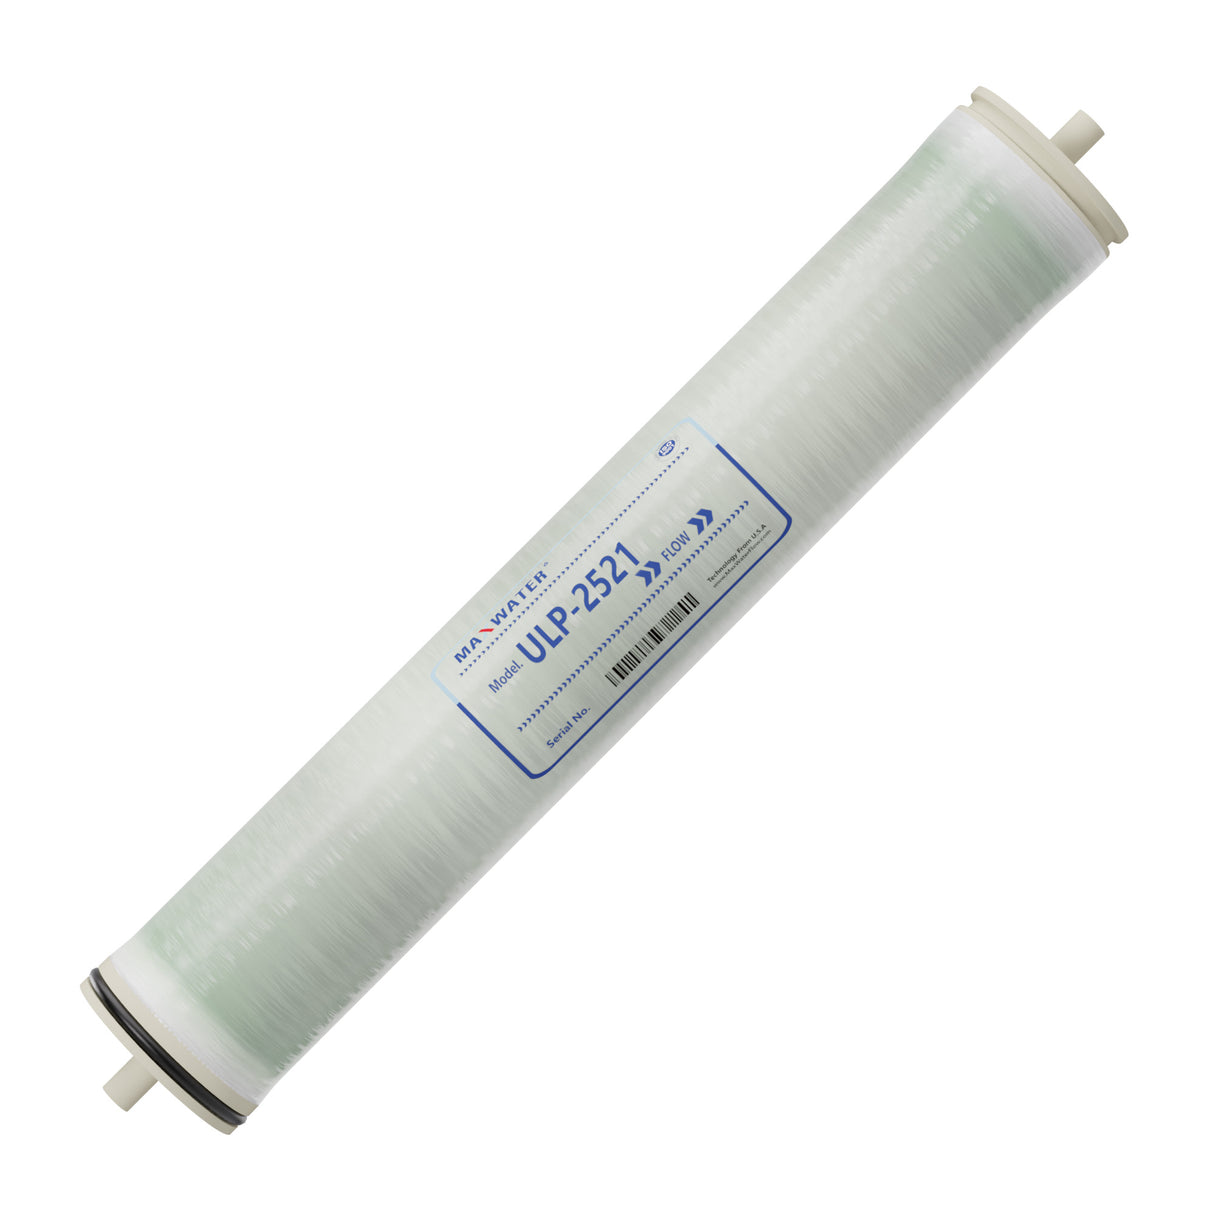 Advanced 2521 commercial RO membrane technology